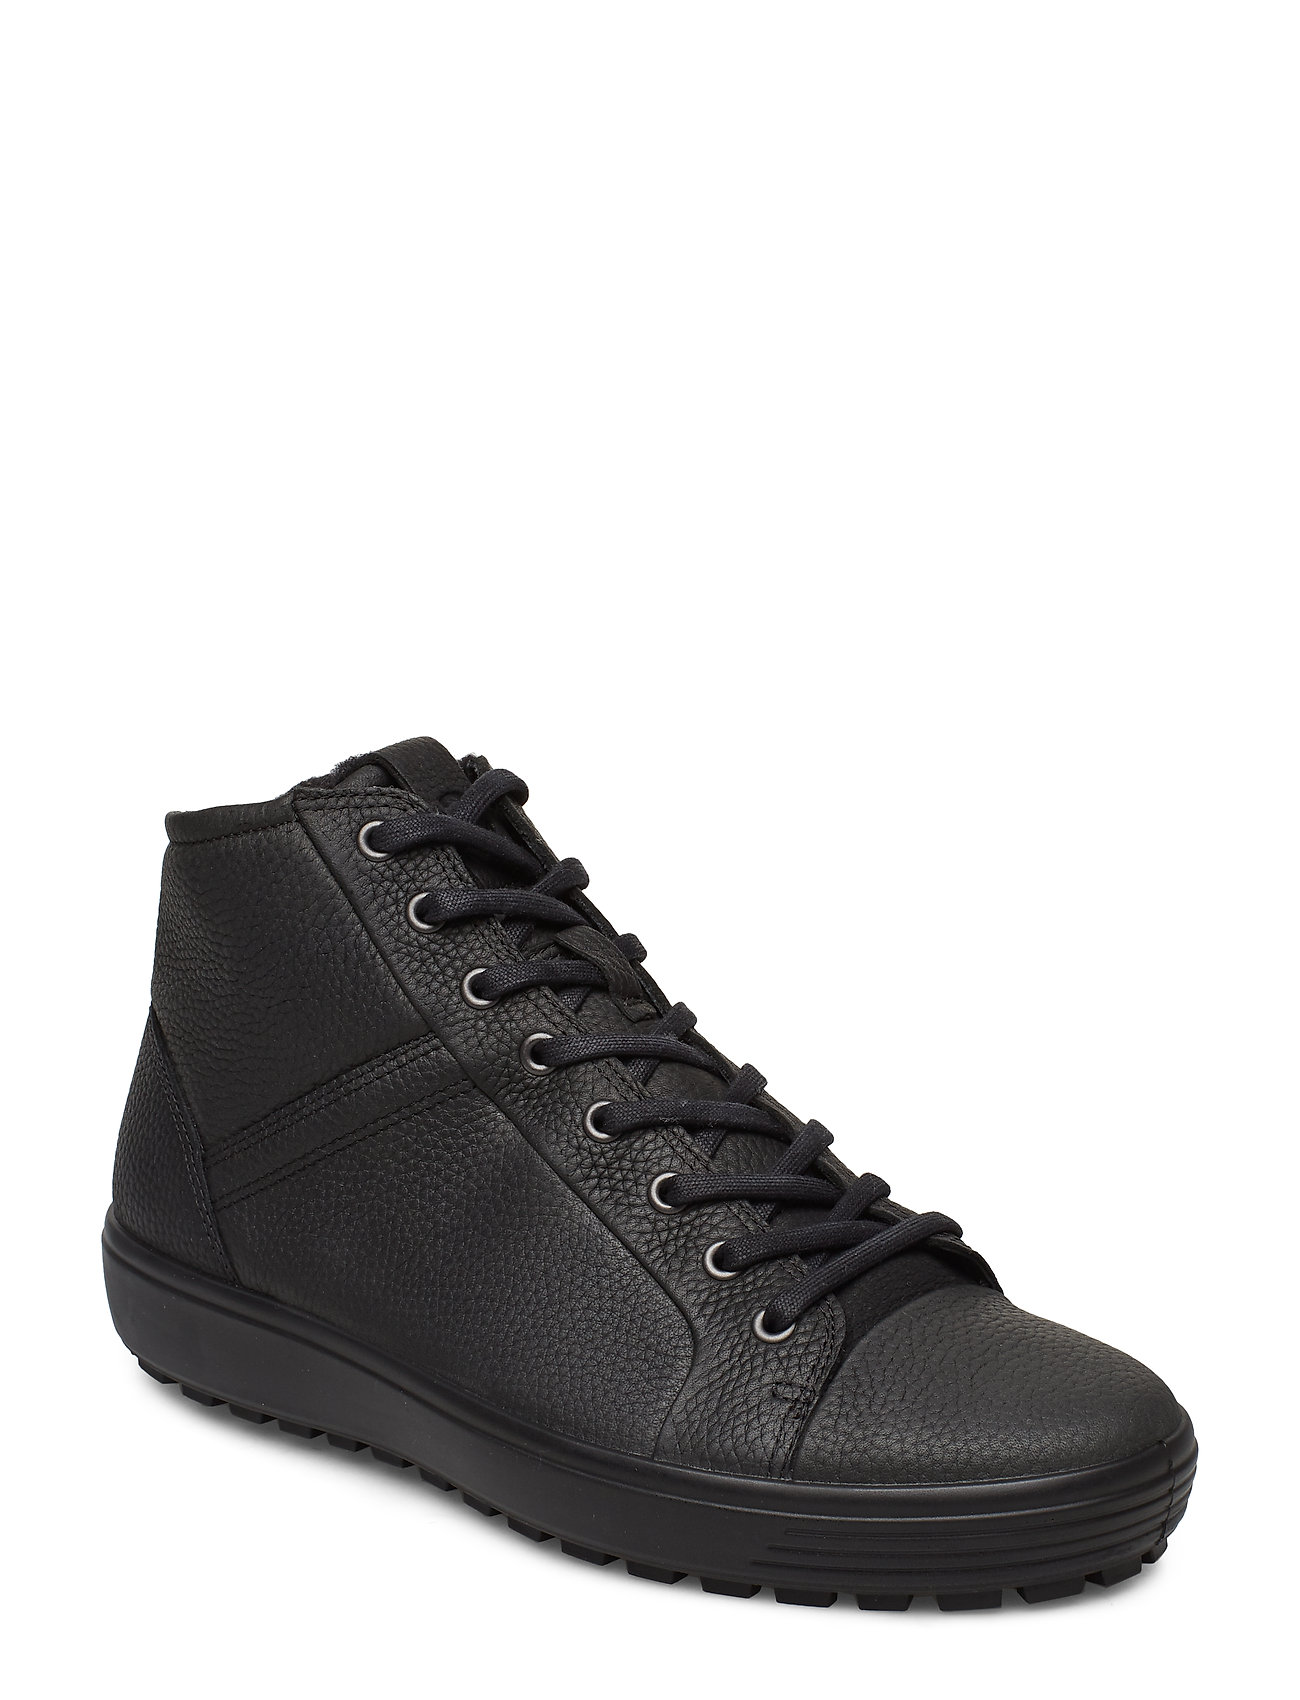 Sort Soft 7 Tred High-top Sneakers sneakers for herre - Pashion.dk